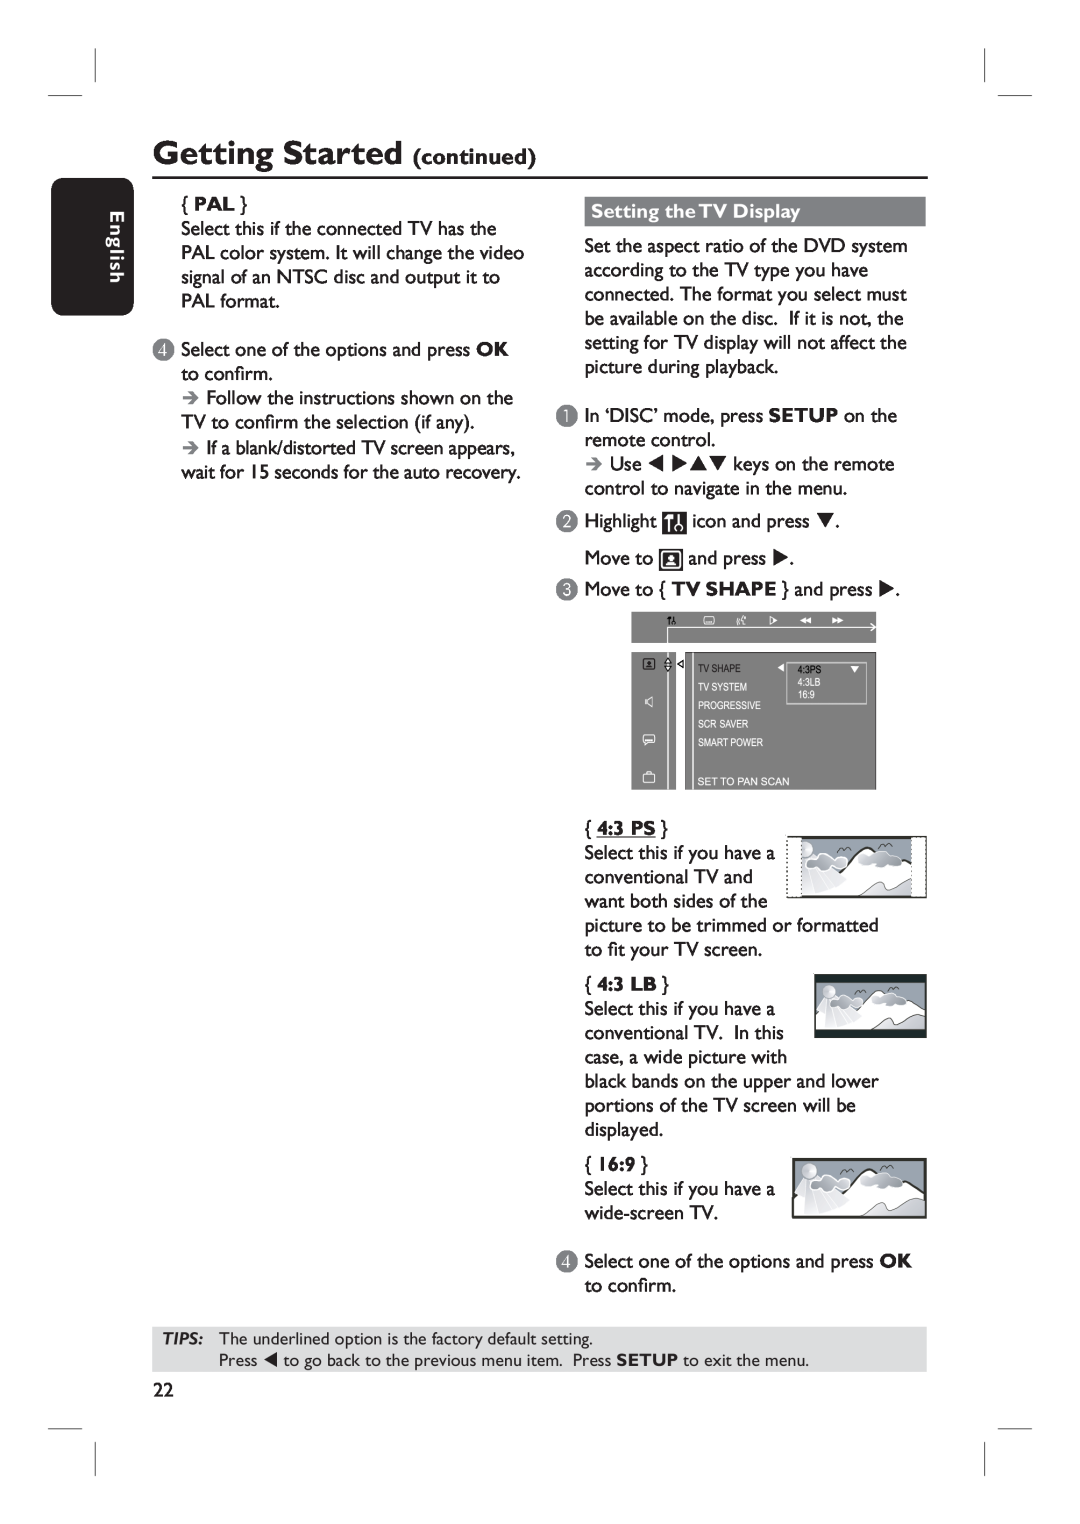 Magnavox MRD100 user manual Setting the TV Display, 4 3 PS, Getting Started continued, English 